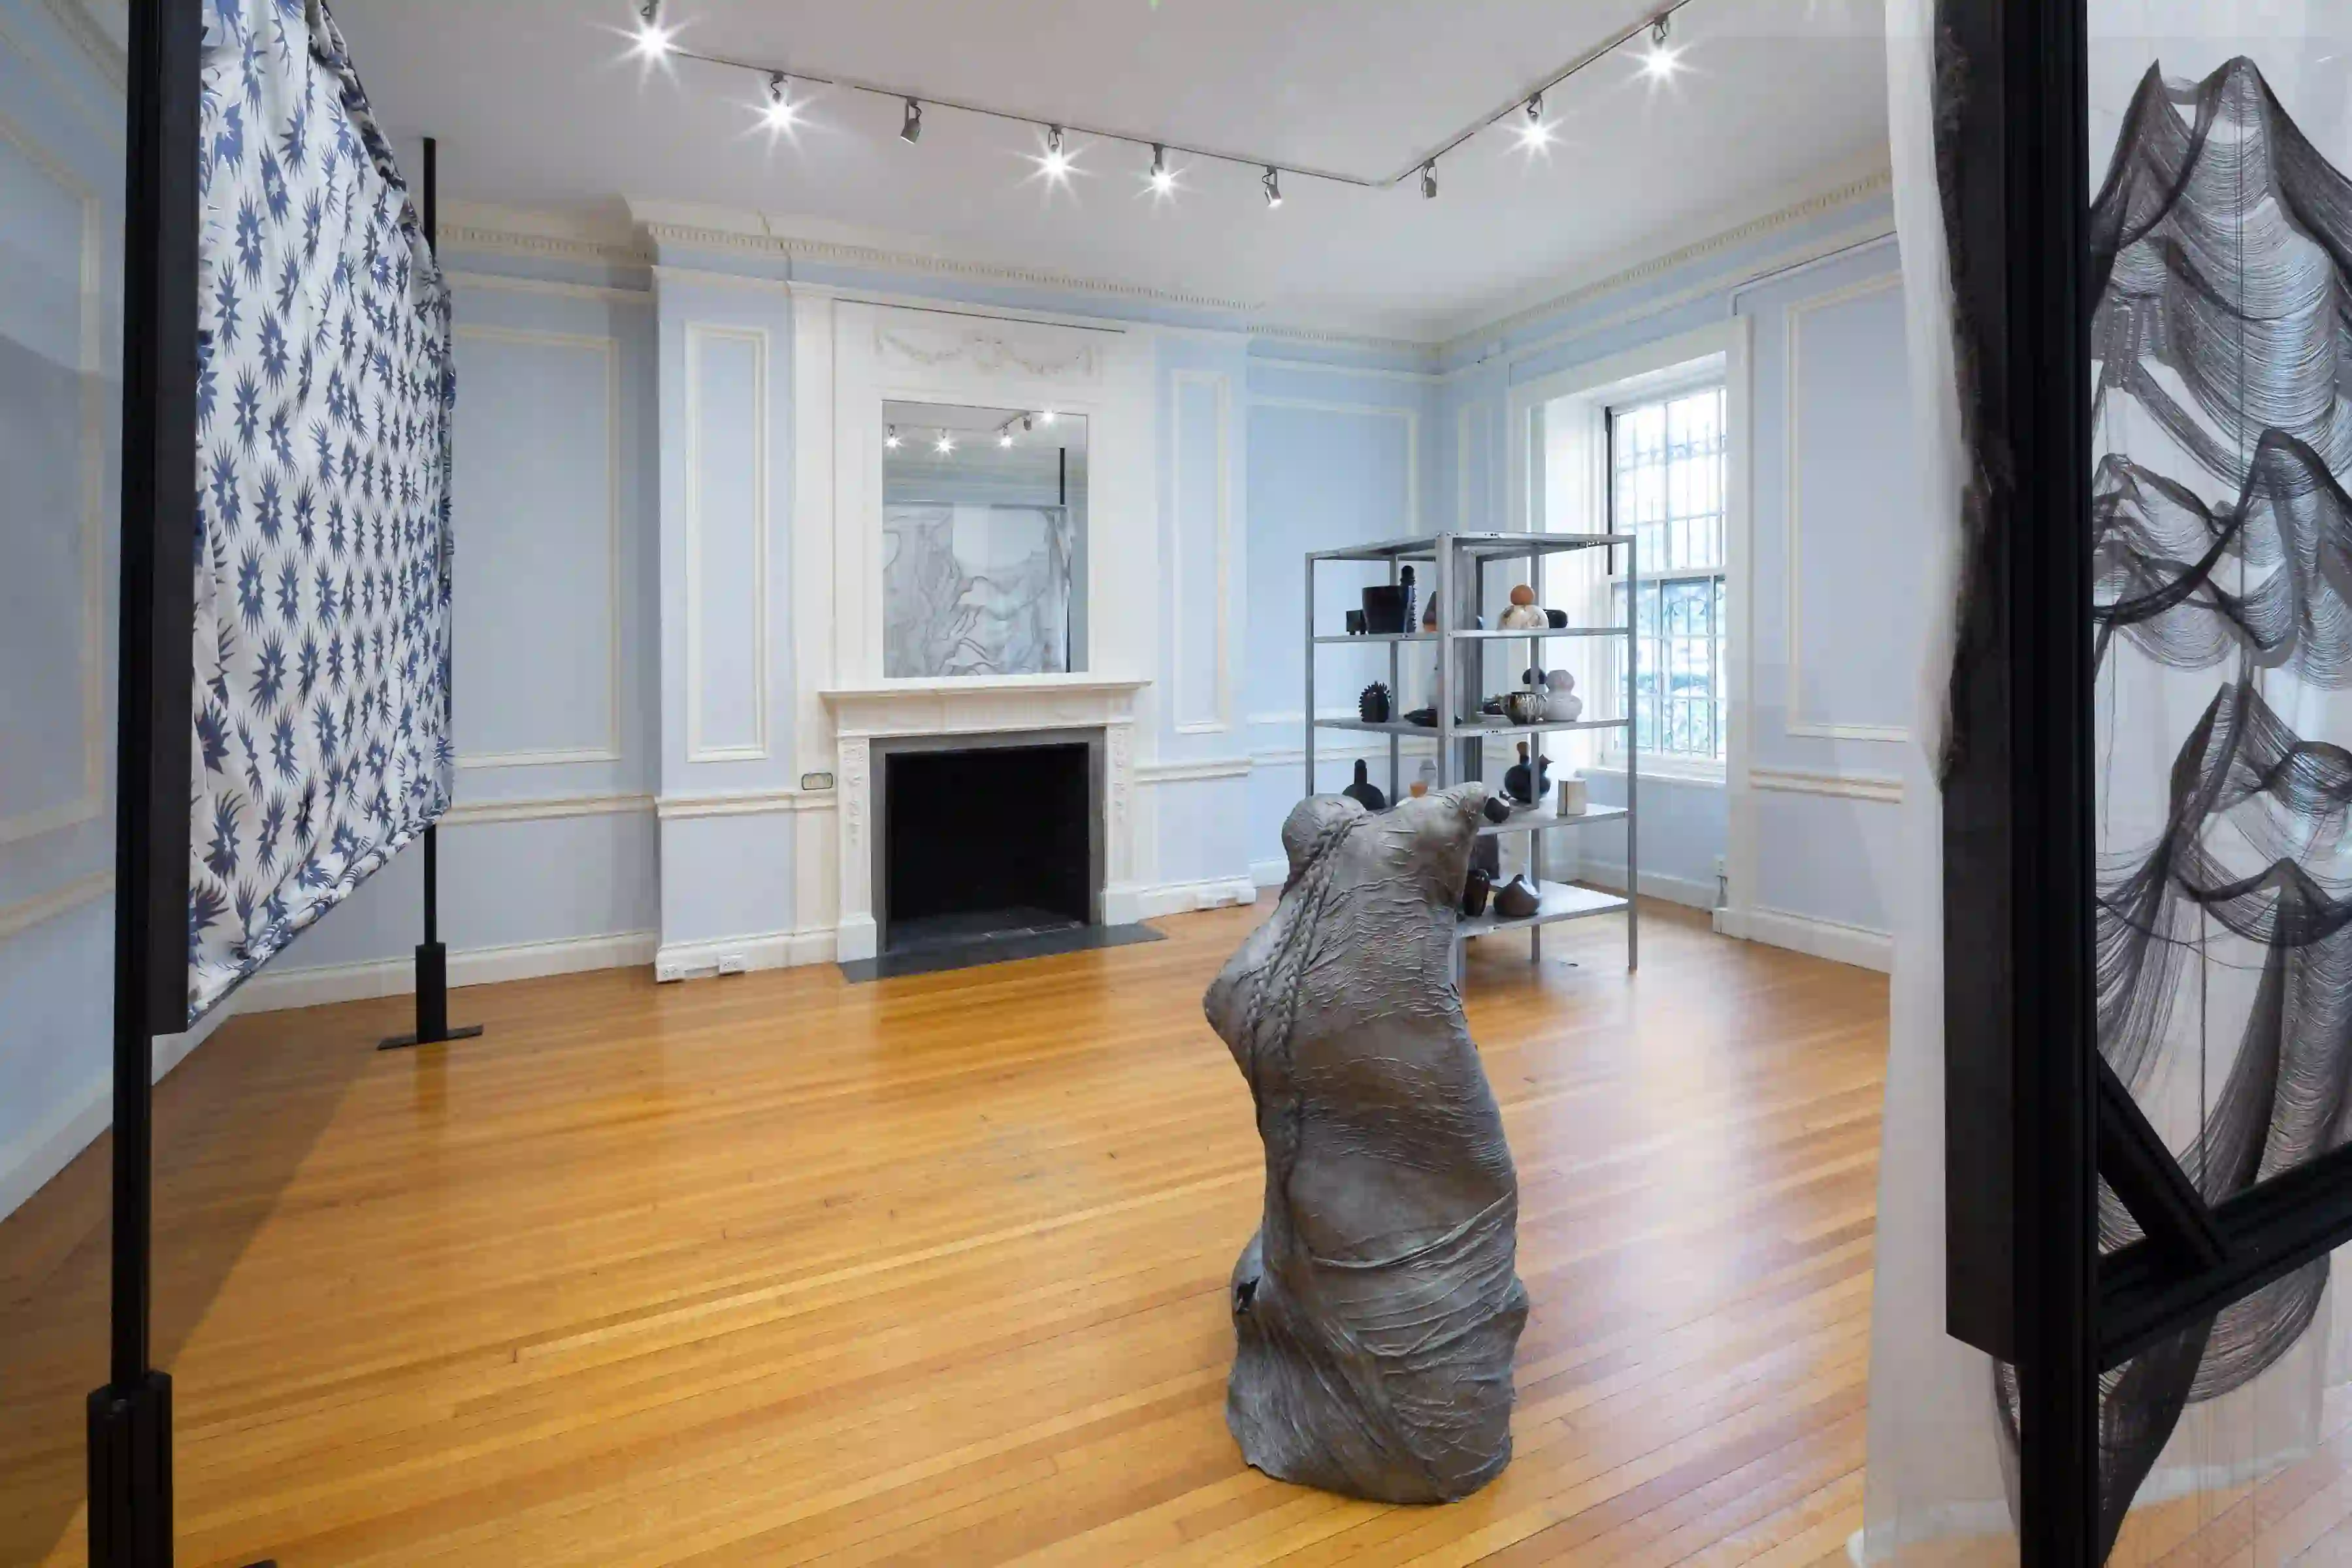 Installation view of the exhibition Margherita Raso: Vizio di Forma at the Italian Cultural Institute in New York. Photos by Alexa Hoyer